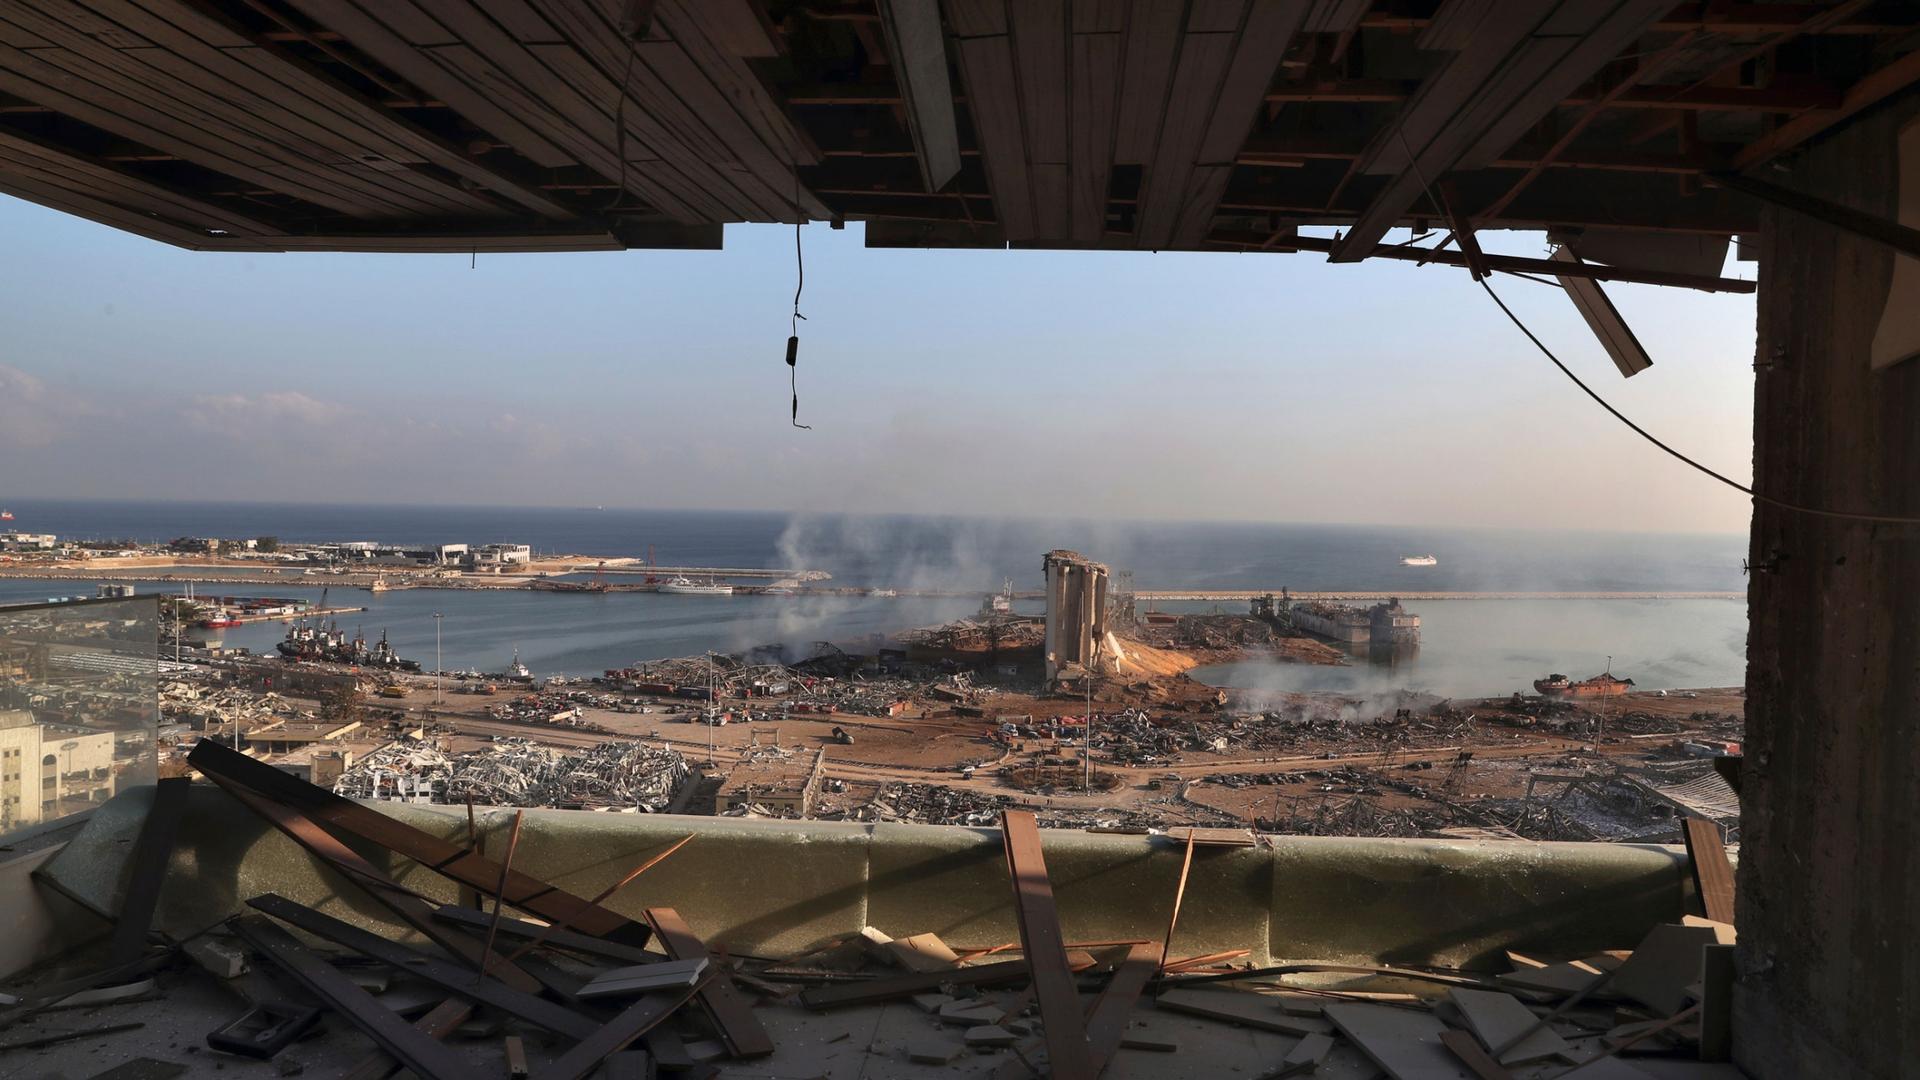 A view of the site of an explosion in the port of Beirut with buildings turned to rubble and shown from inside a facility with it's window blown out.